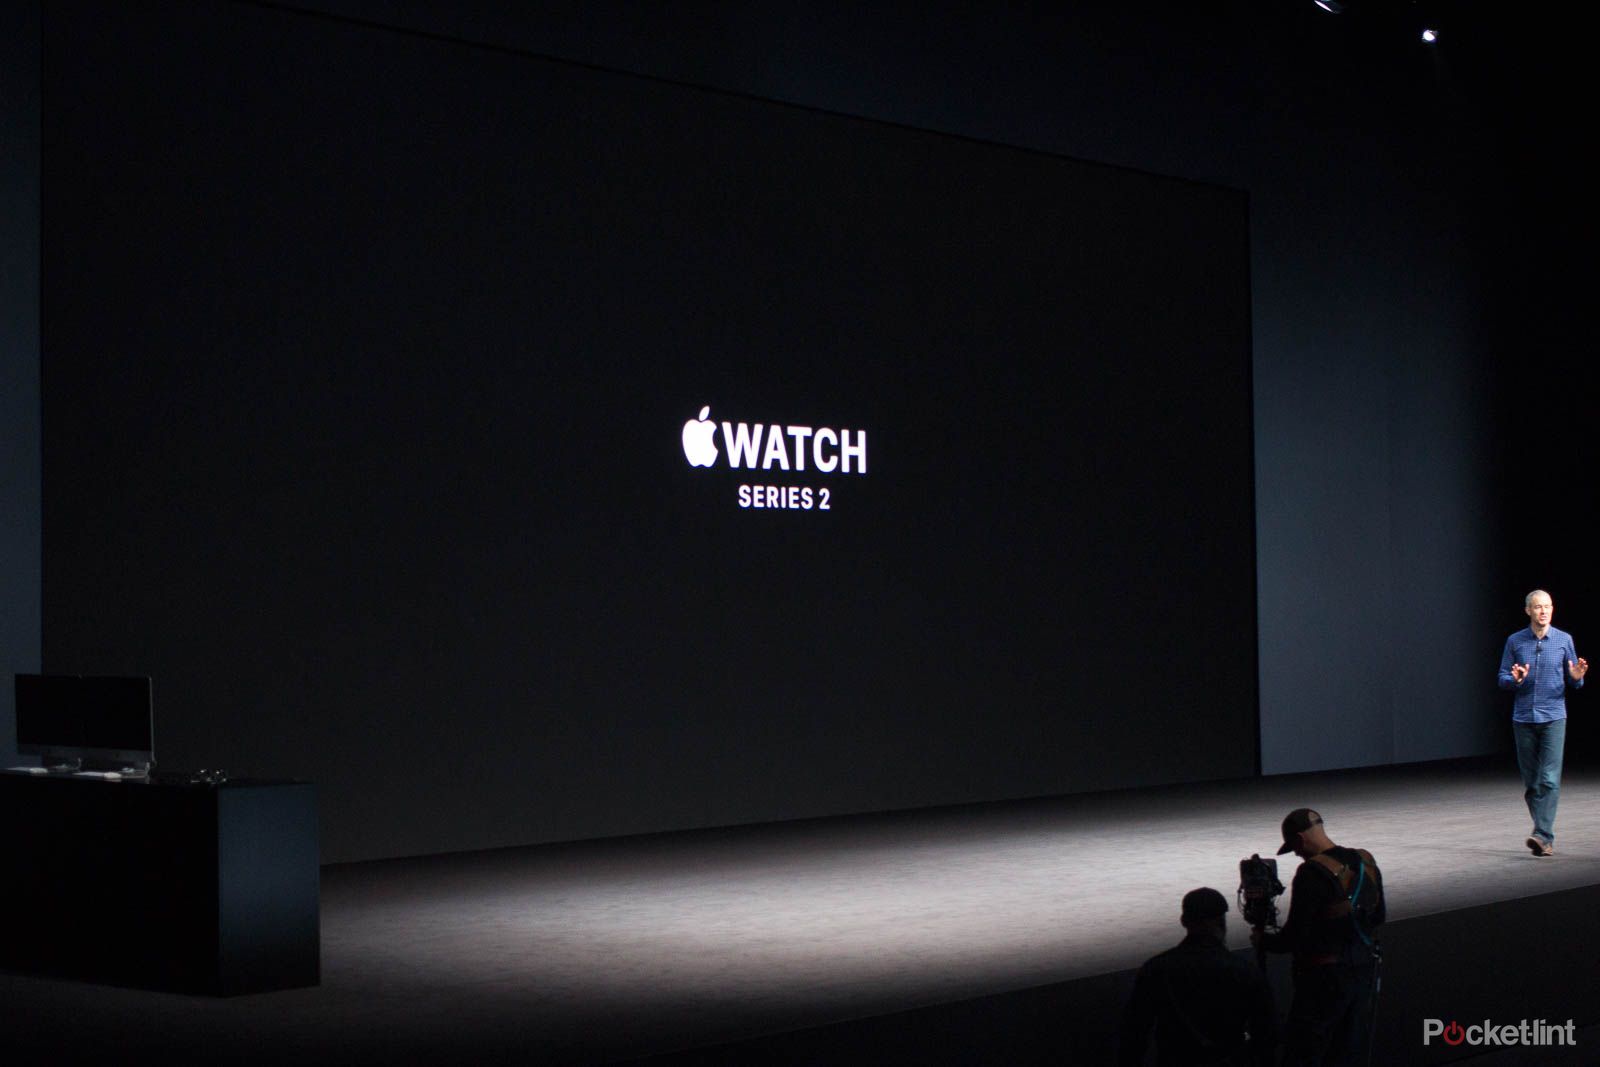 finally apple shows off new apple watch series 2 models image 1